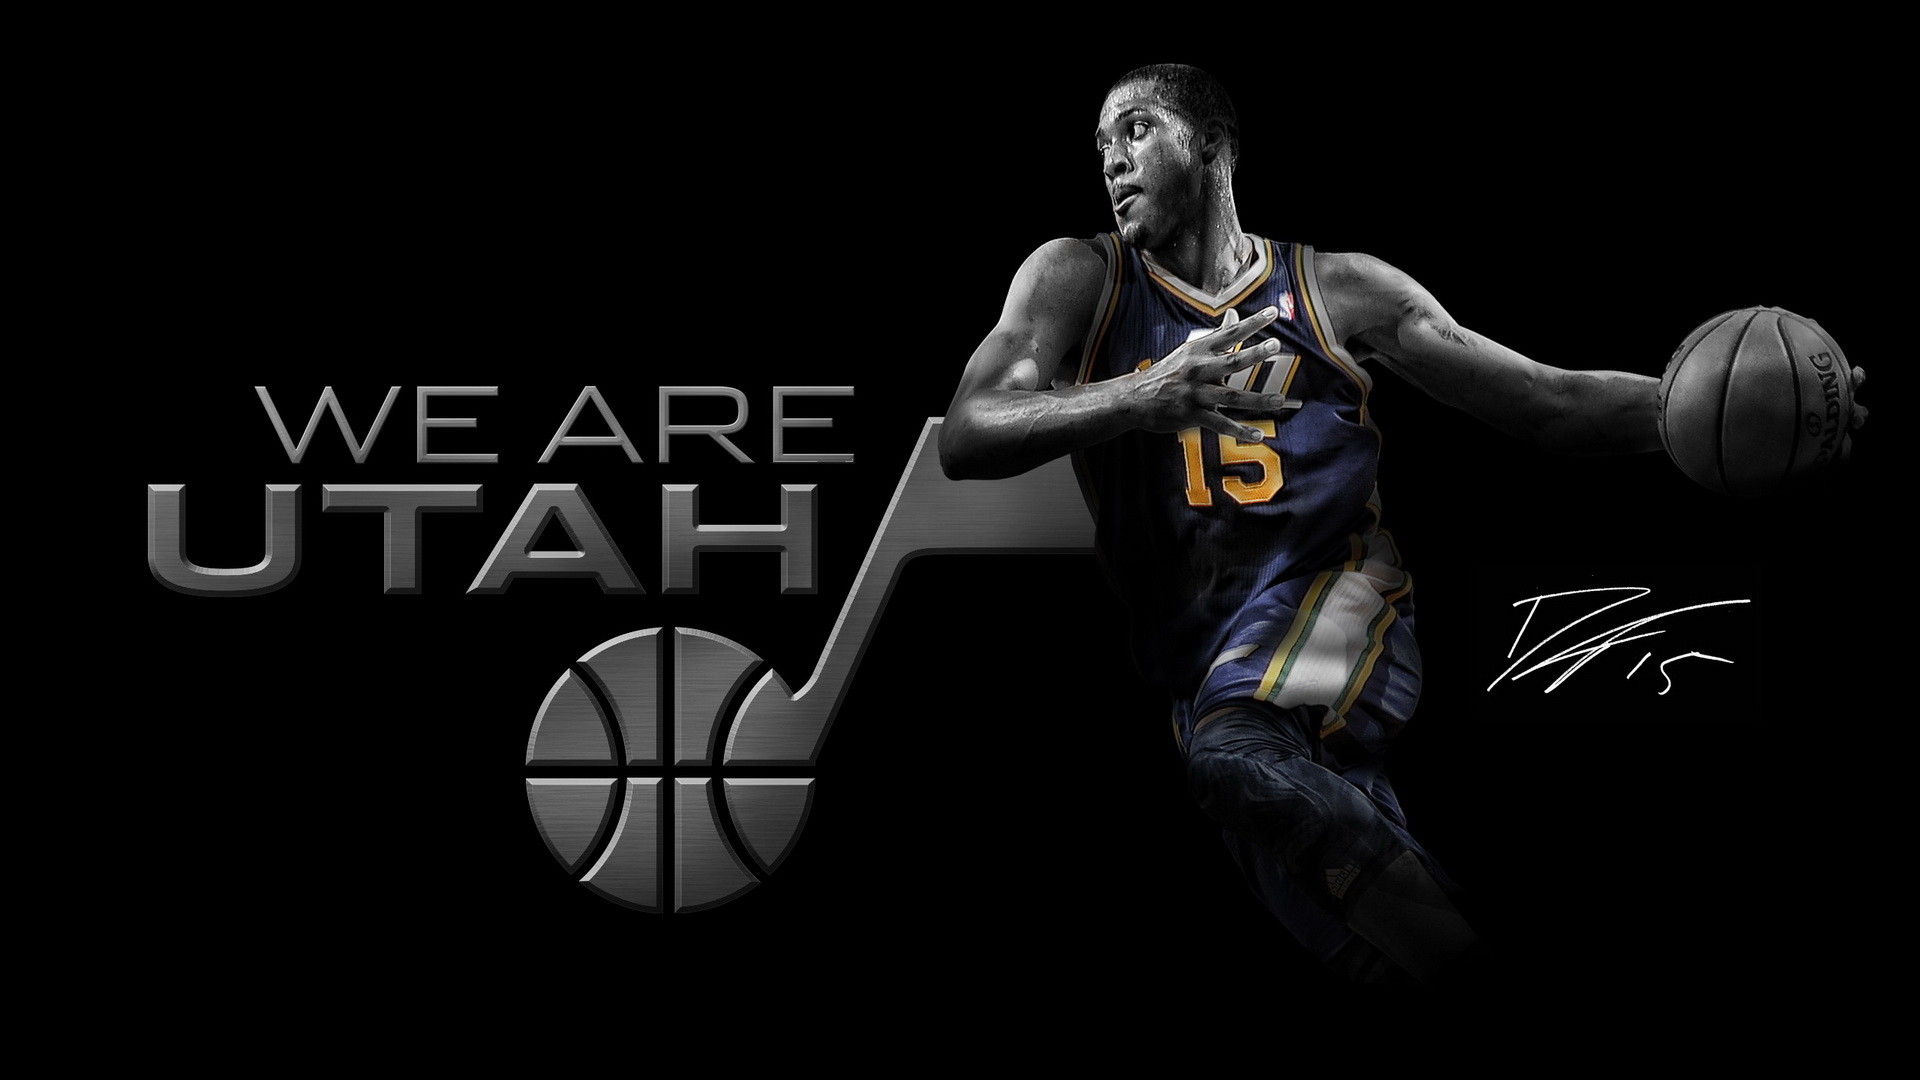 Utah Jazz Wallpaper For Mac Backgrounds with high-resolution 1920x1080 pixel. You can use this wallpaper for your Desktop Computer Backgrounds, Windows or Mac Screensavers, iPhone Lock screen, Tablet or Android and another Mobile Phone device